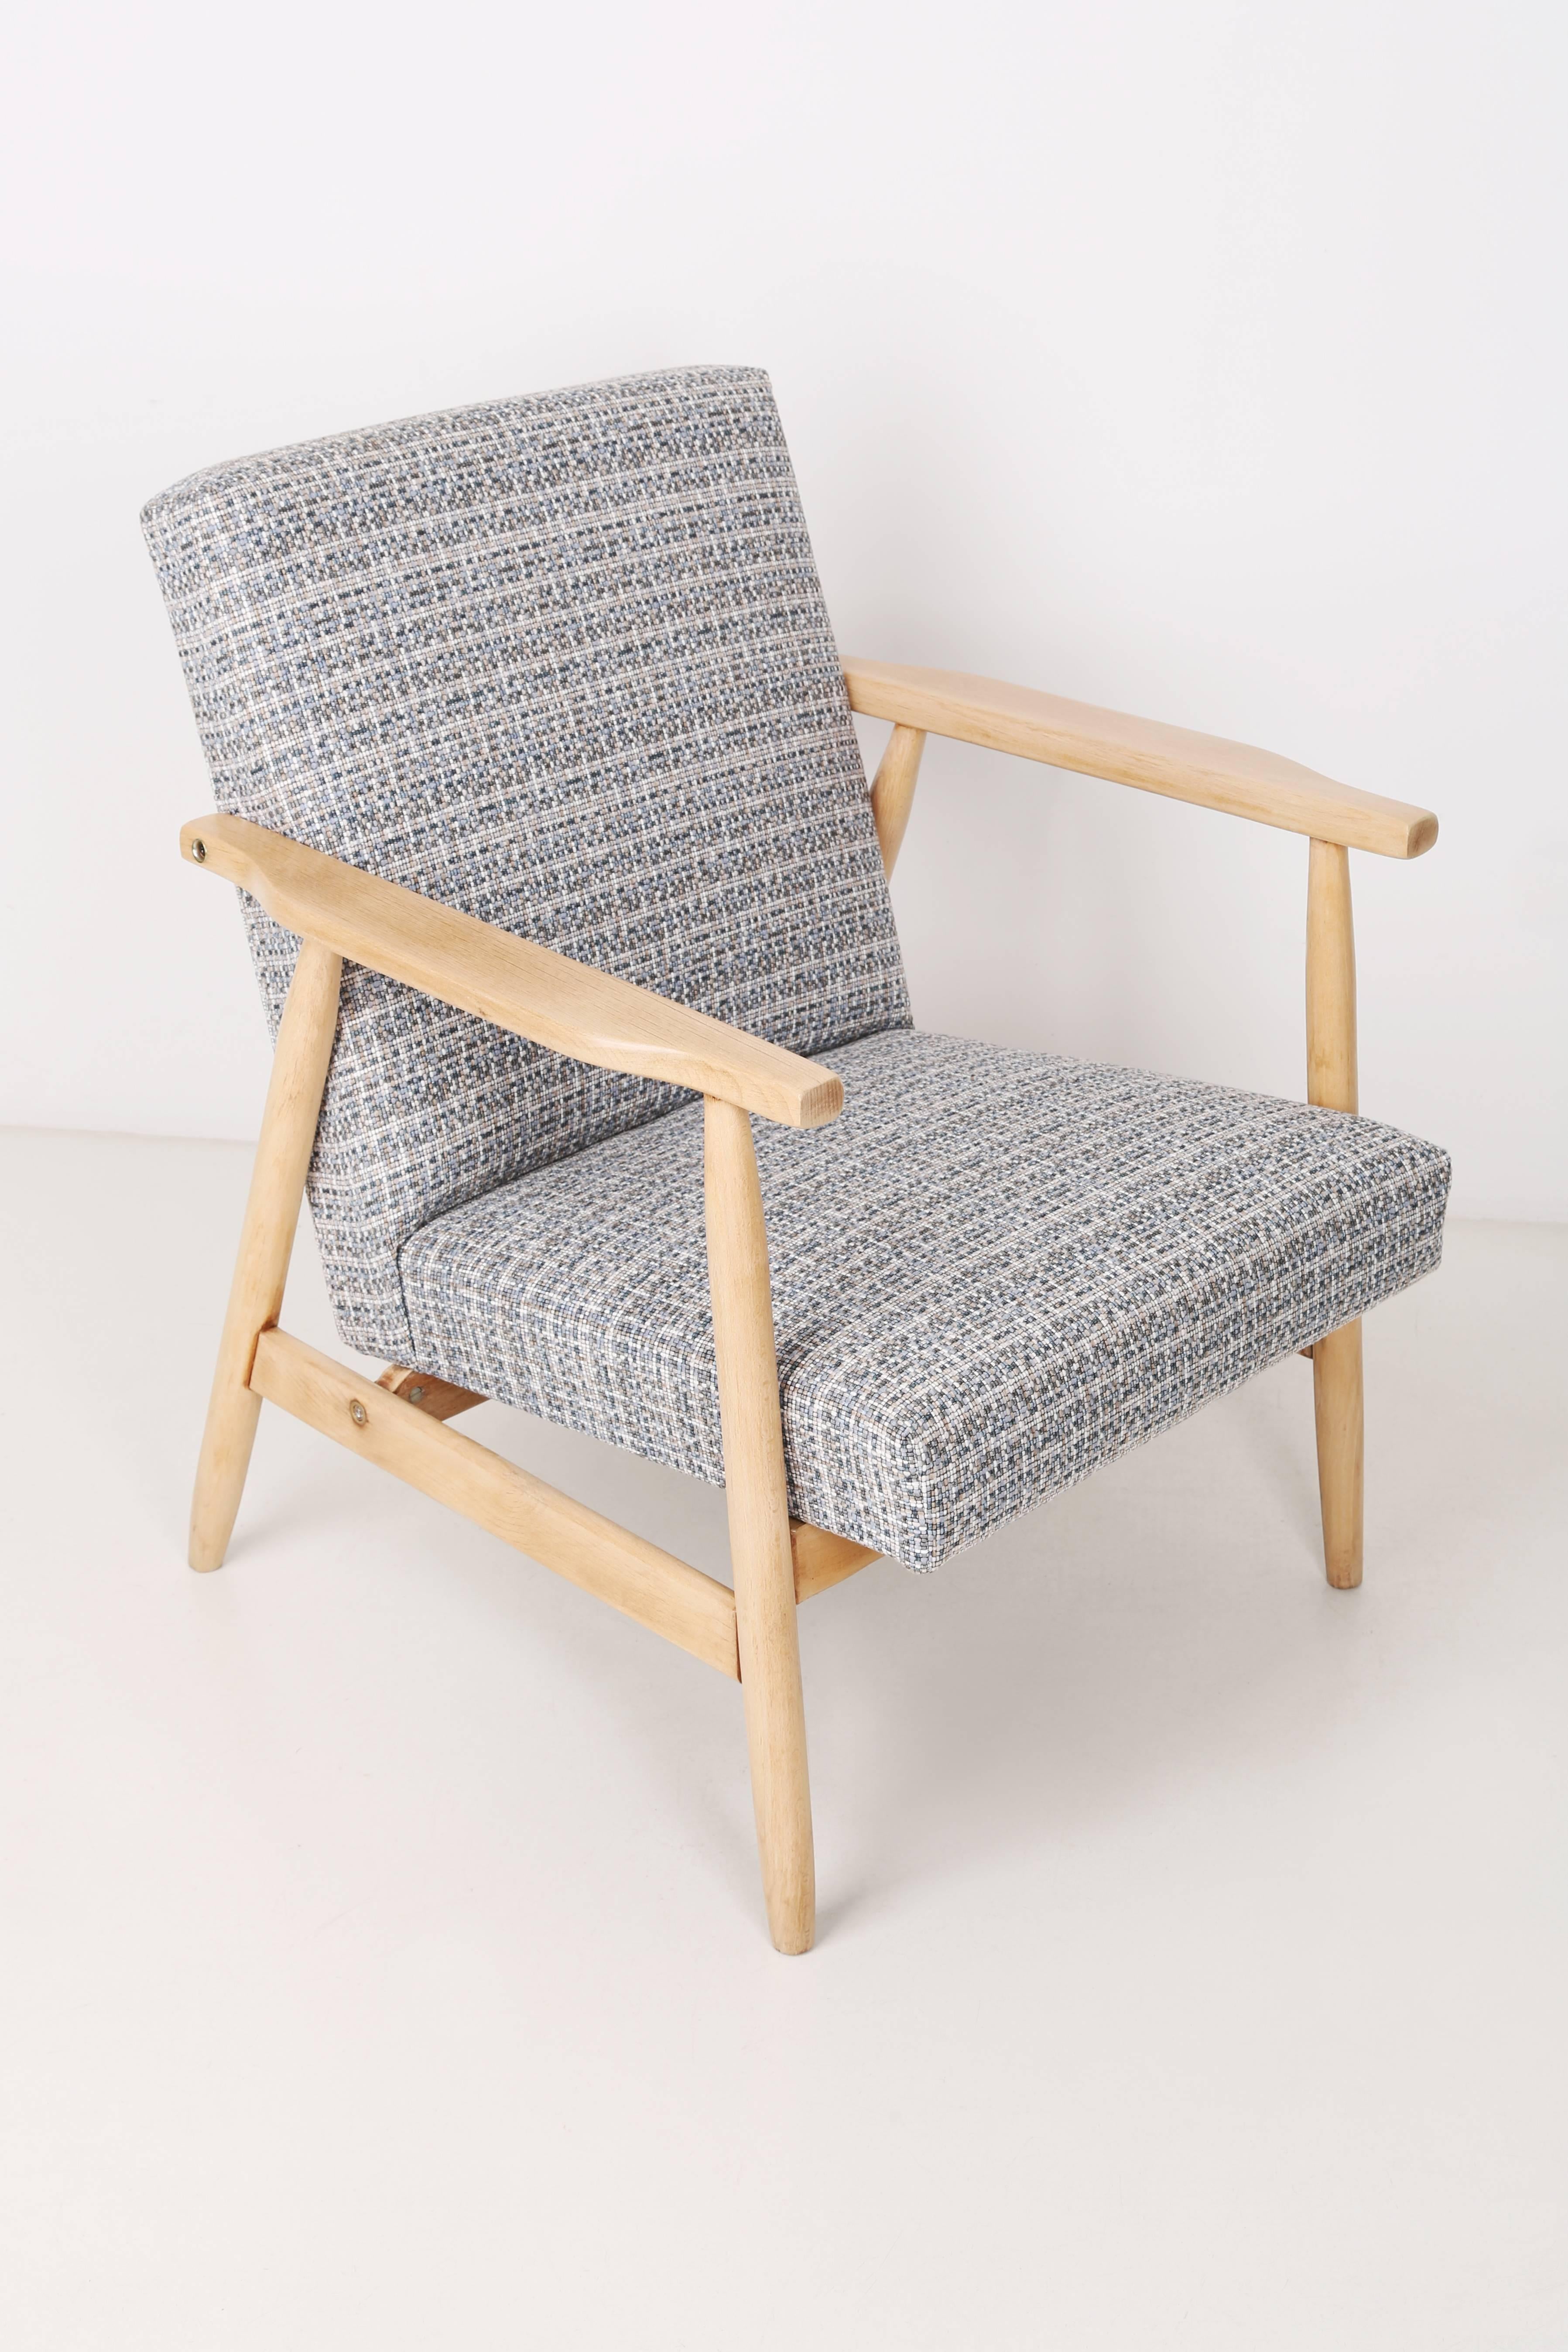 A very comfortable, stabile armchair designed in the 1960s. It was made in Poland. Armchairs are after full professional upholstery and carpentry renovation. The seat is covered with high quality fabric with a small pixel pattern. We can prepare